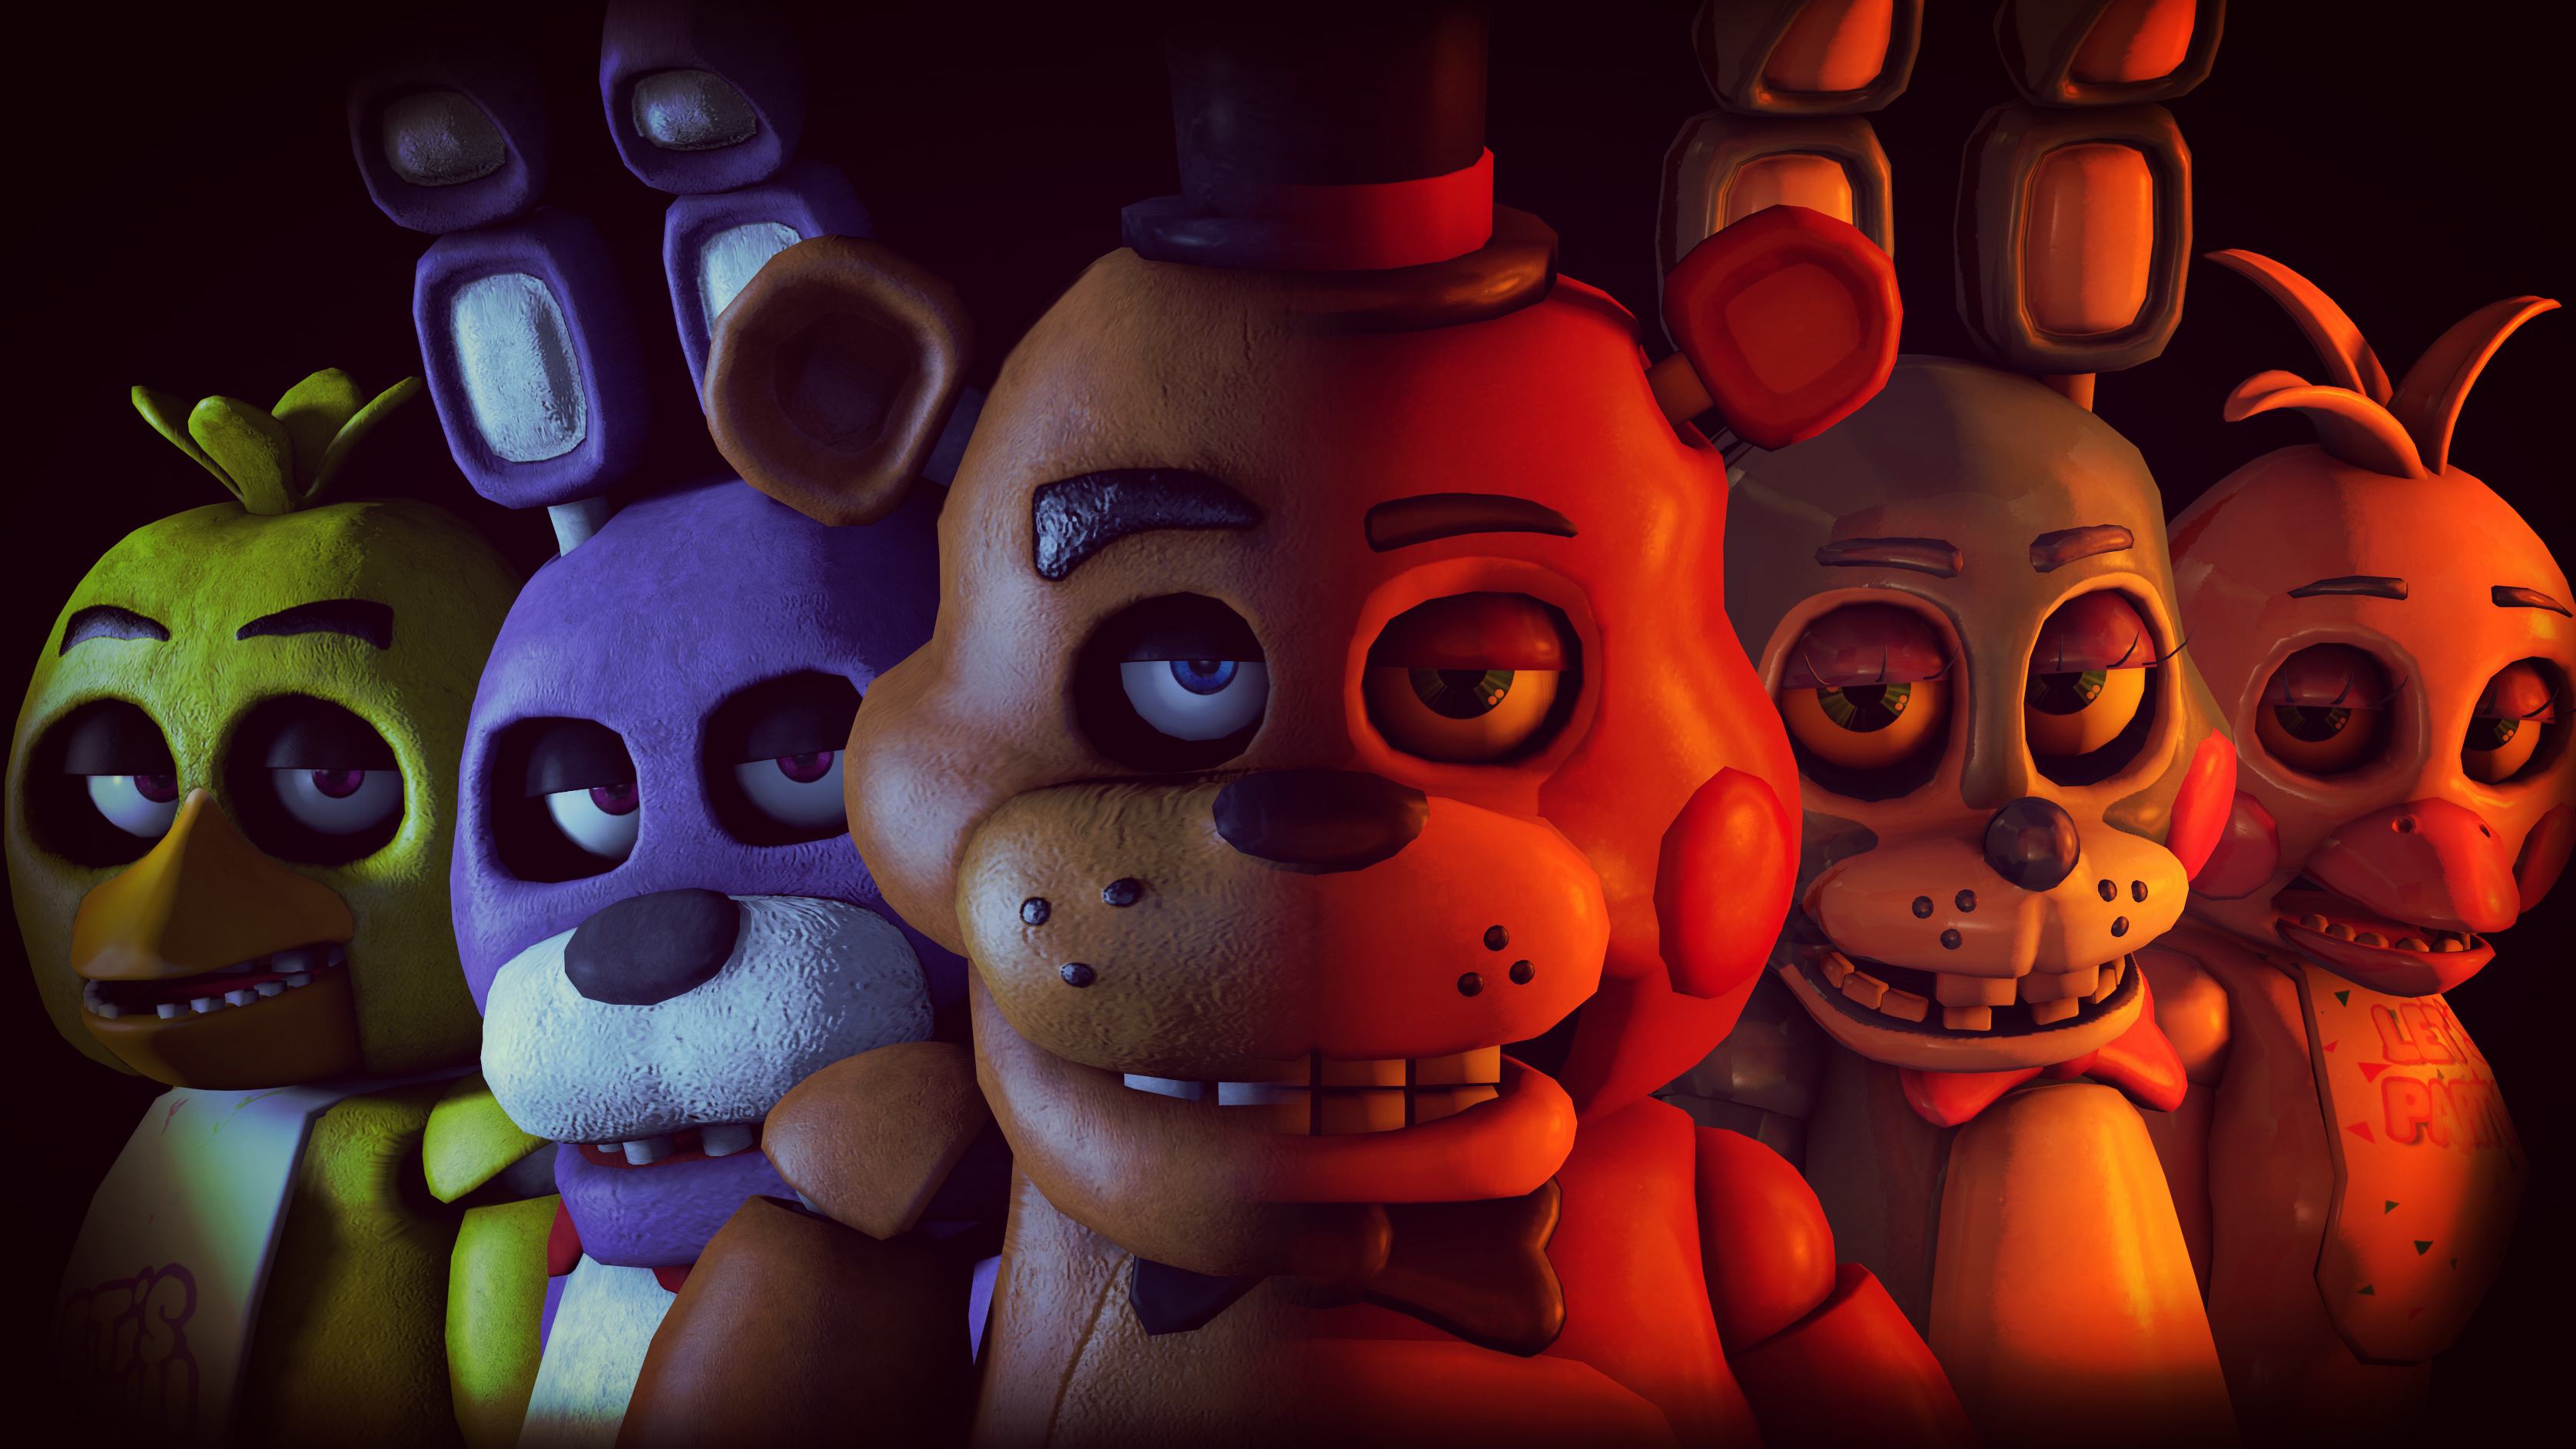 Security Breach In Five Nights At Freddy